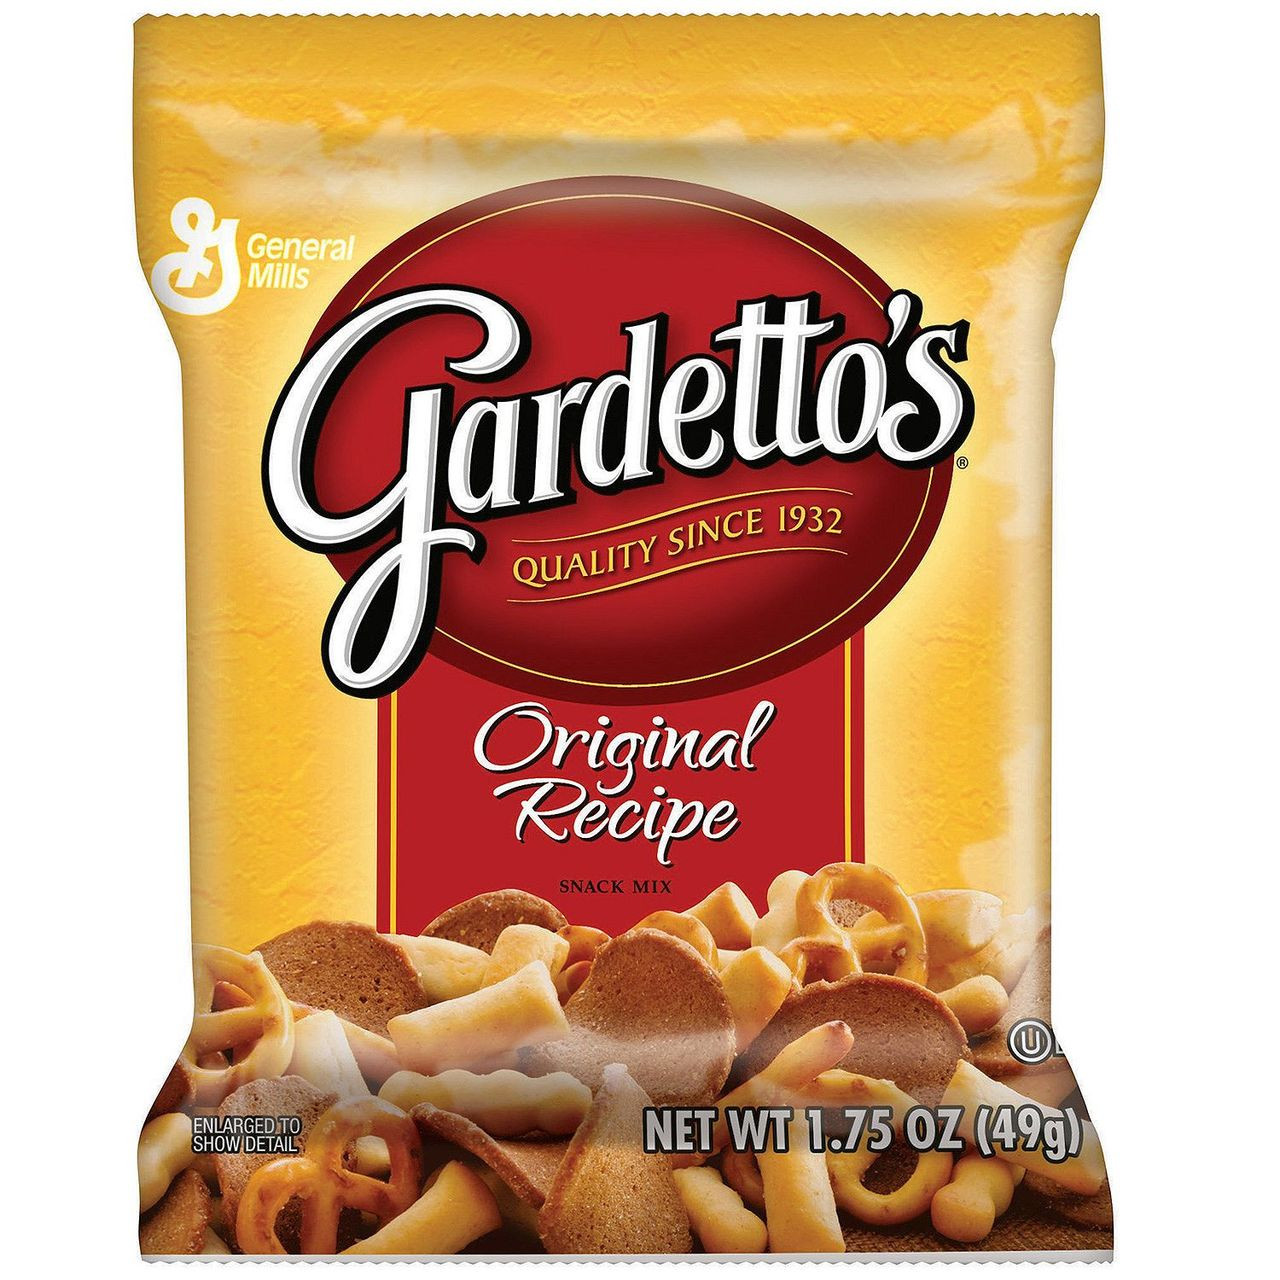 Deliciously Crunchy: Gardetto's Roasted Garlic Rye Chips Review